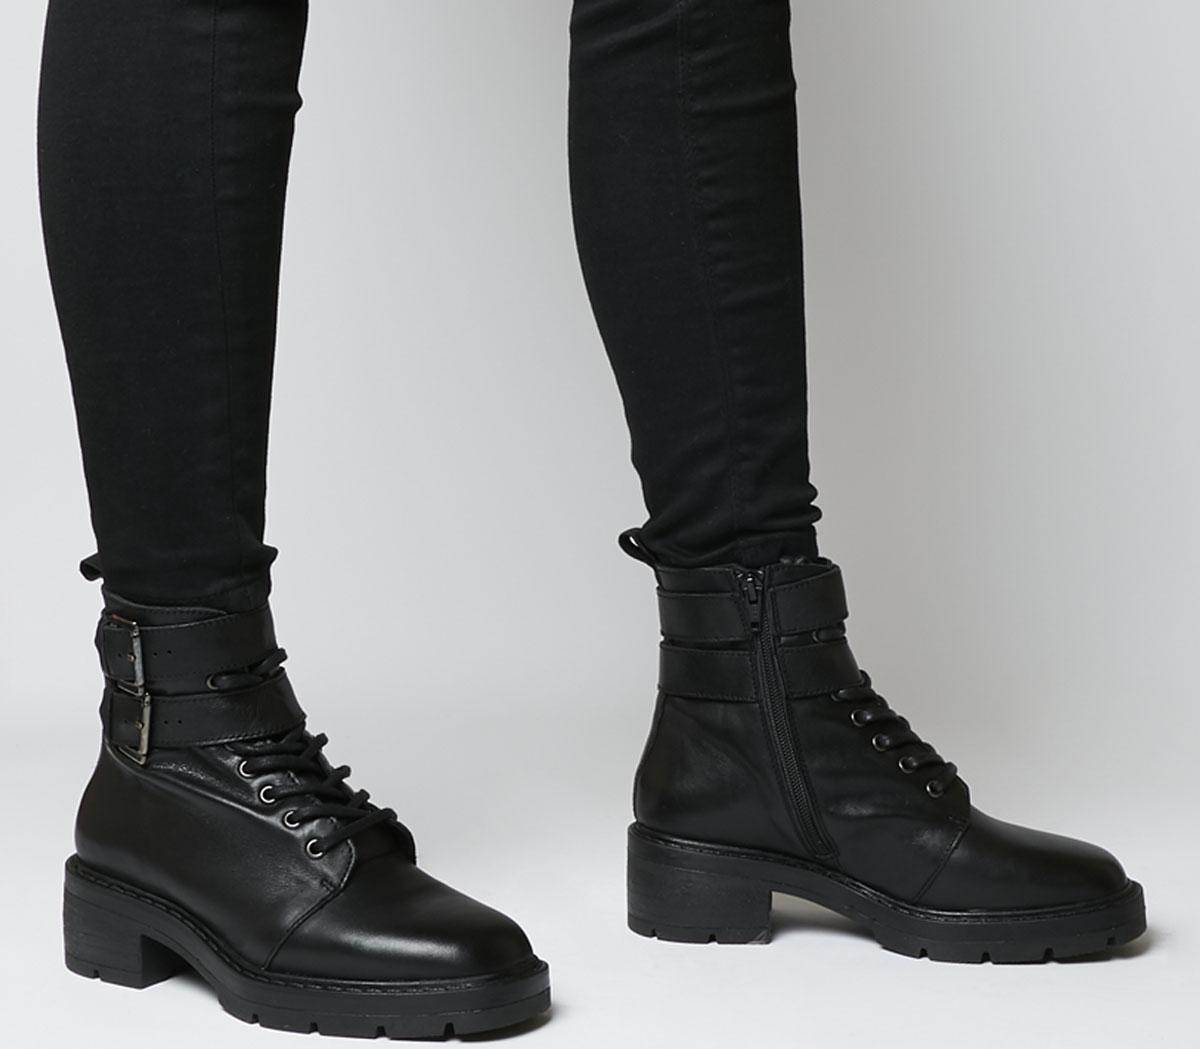 OFFICEAuthority Lace Up BootsBlack Leather